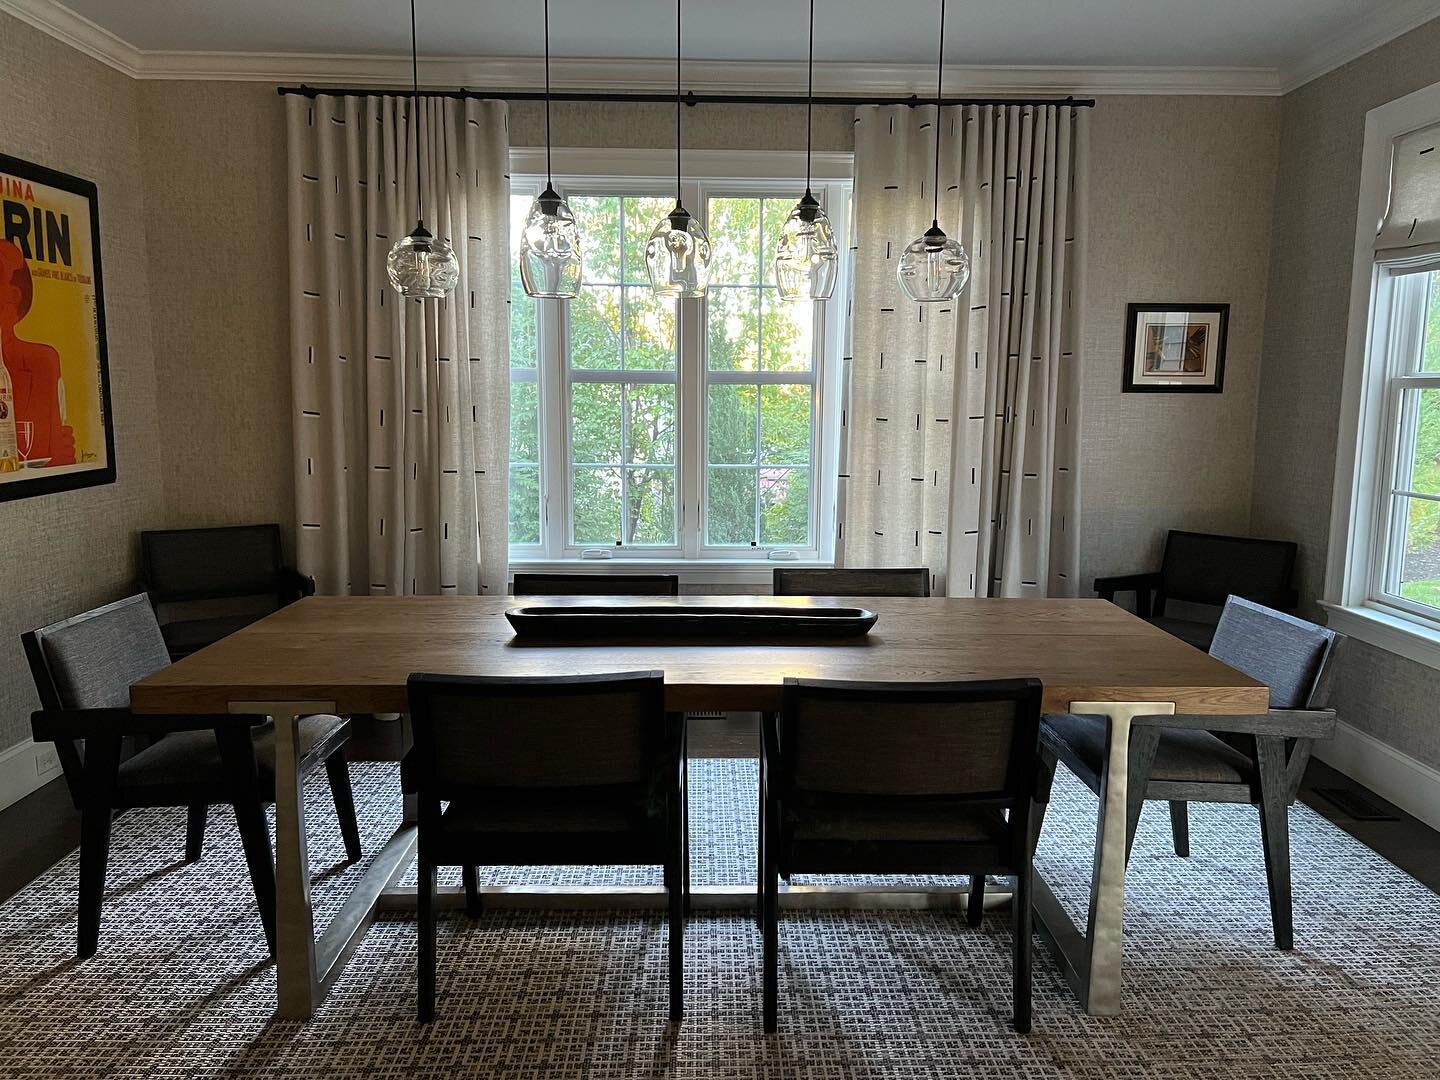 Dining Room Delight 🖤
(Swipe for the before)
Removing the faux wainscoting and ceiling detail in this room enabled us to create a sleeker, more cohesive vibe for this space which is open to the kitchen; we added textured metallic wallpaper, hand-blo